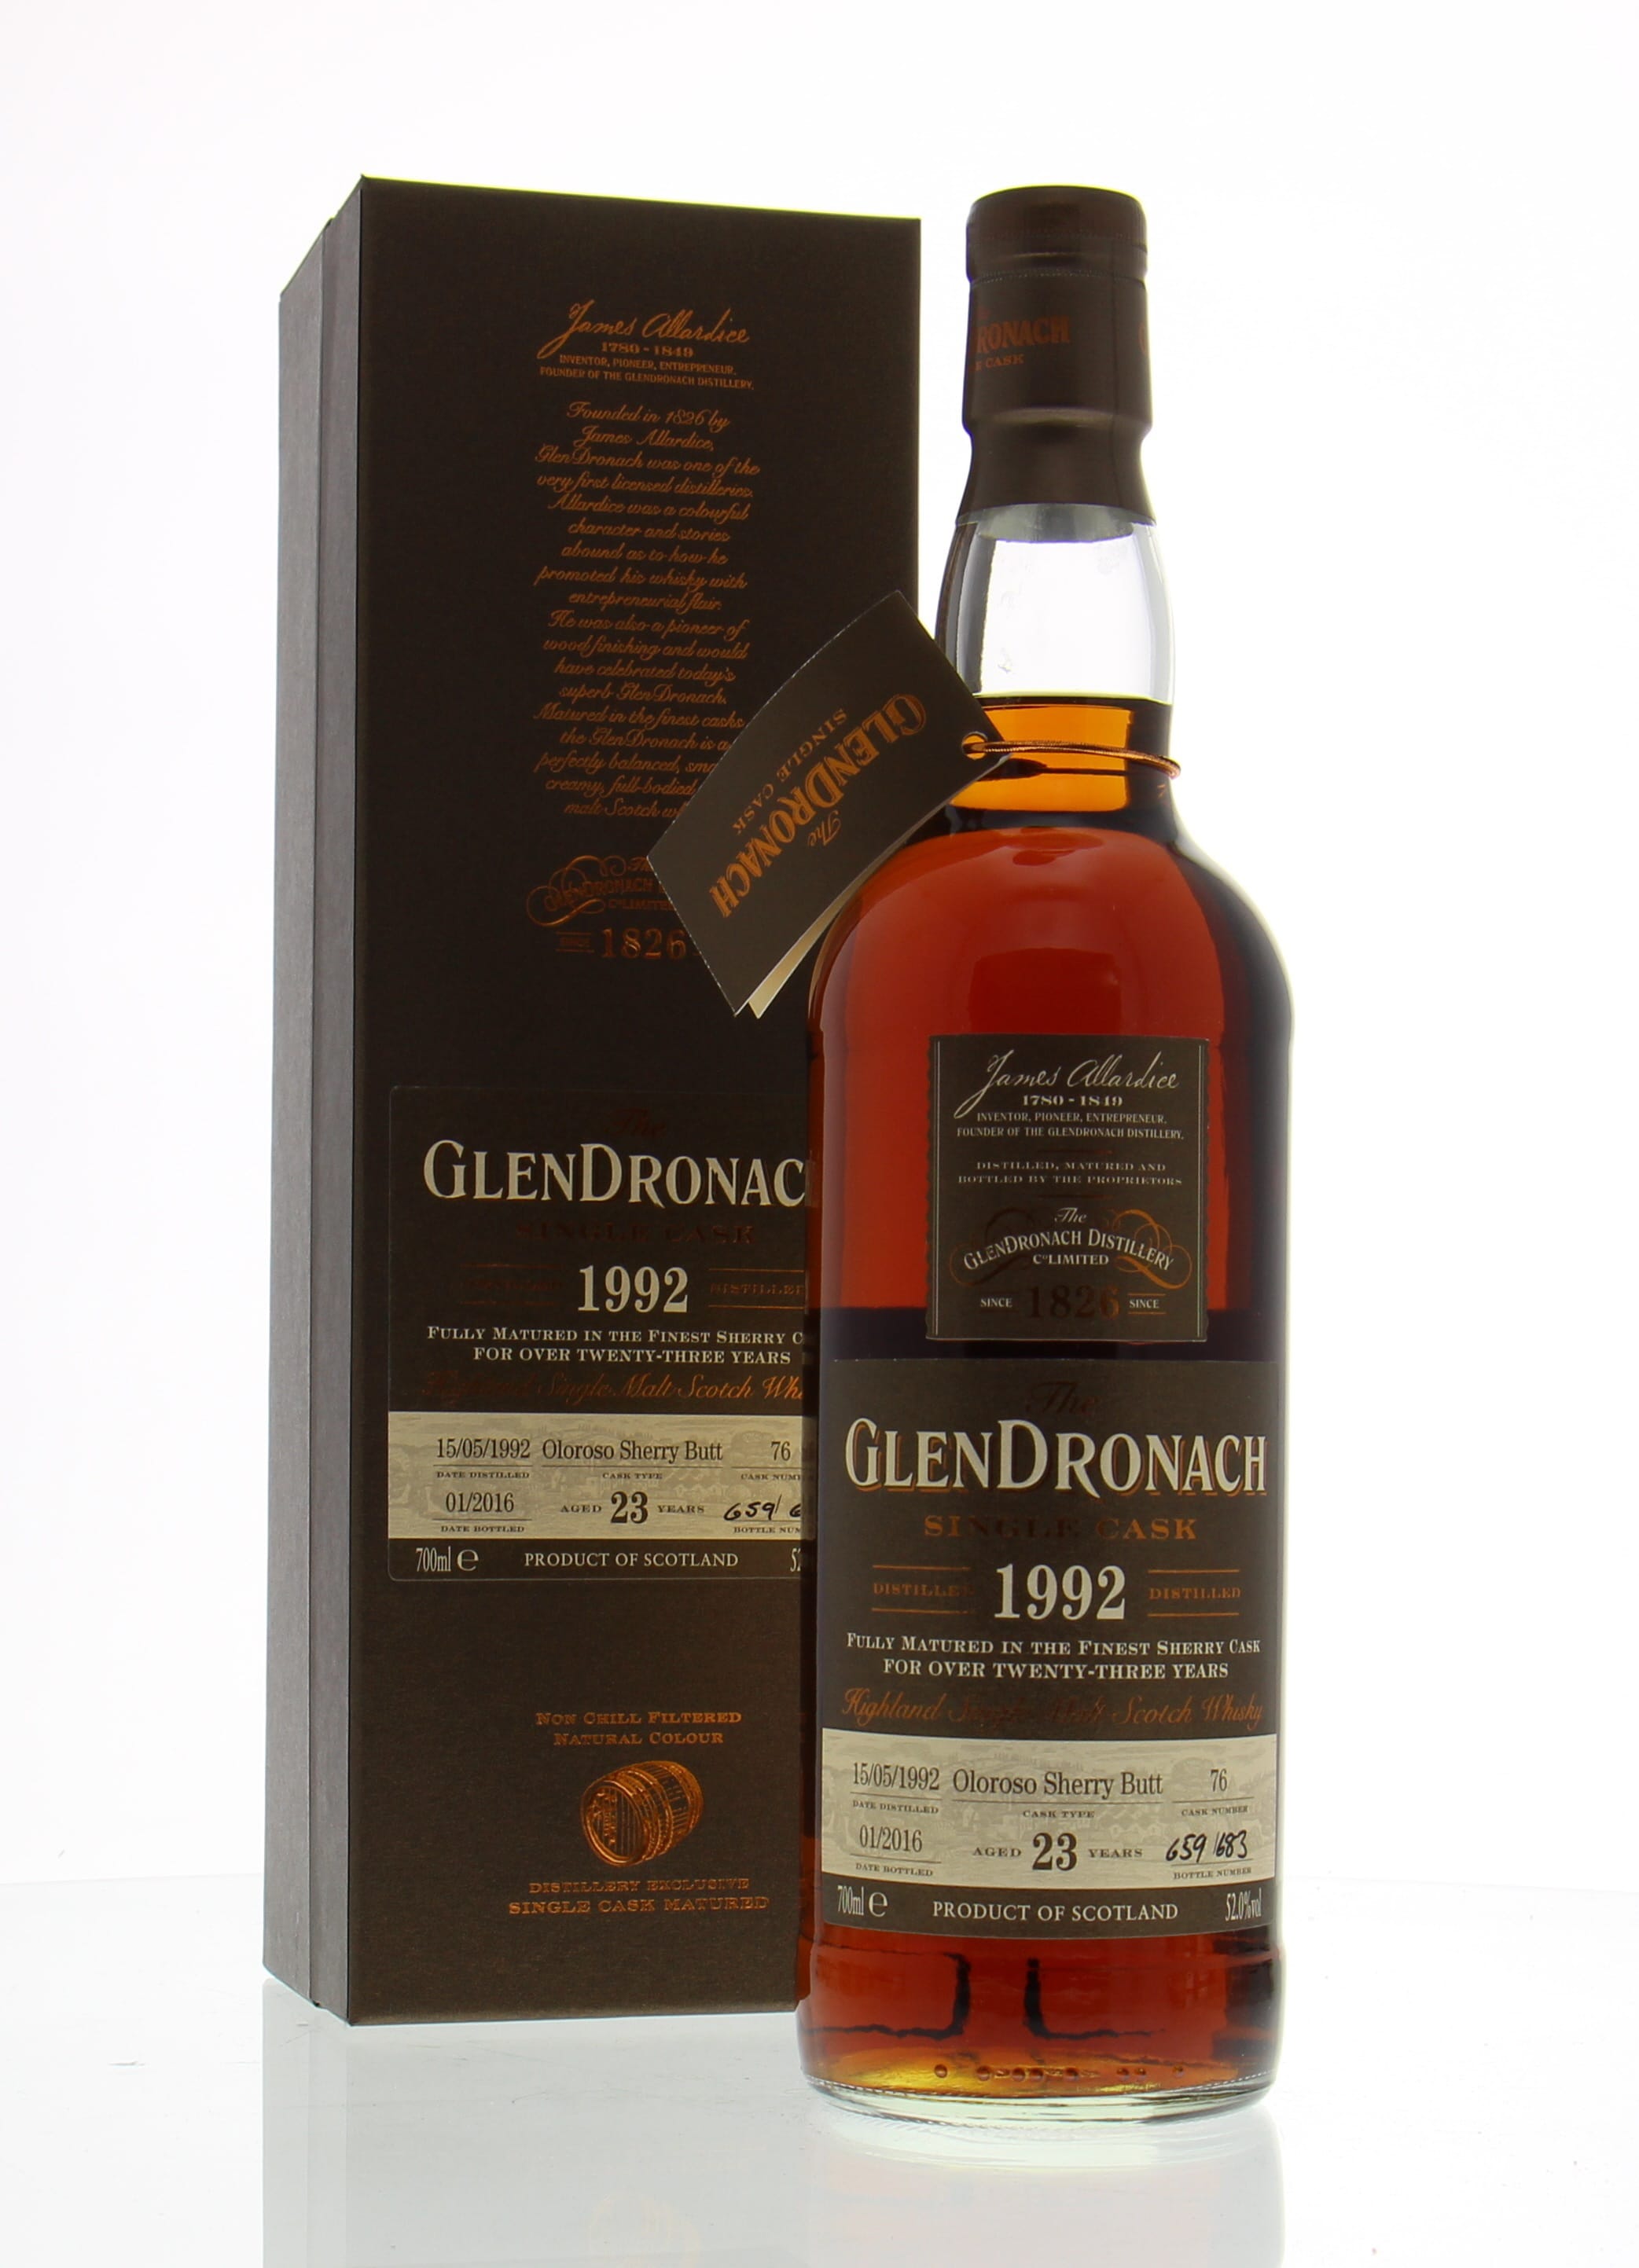 Glendronach - 23 Years Old Batch 13 Cask:76 52.0% 1992 In Original Container